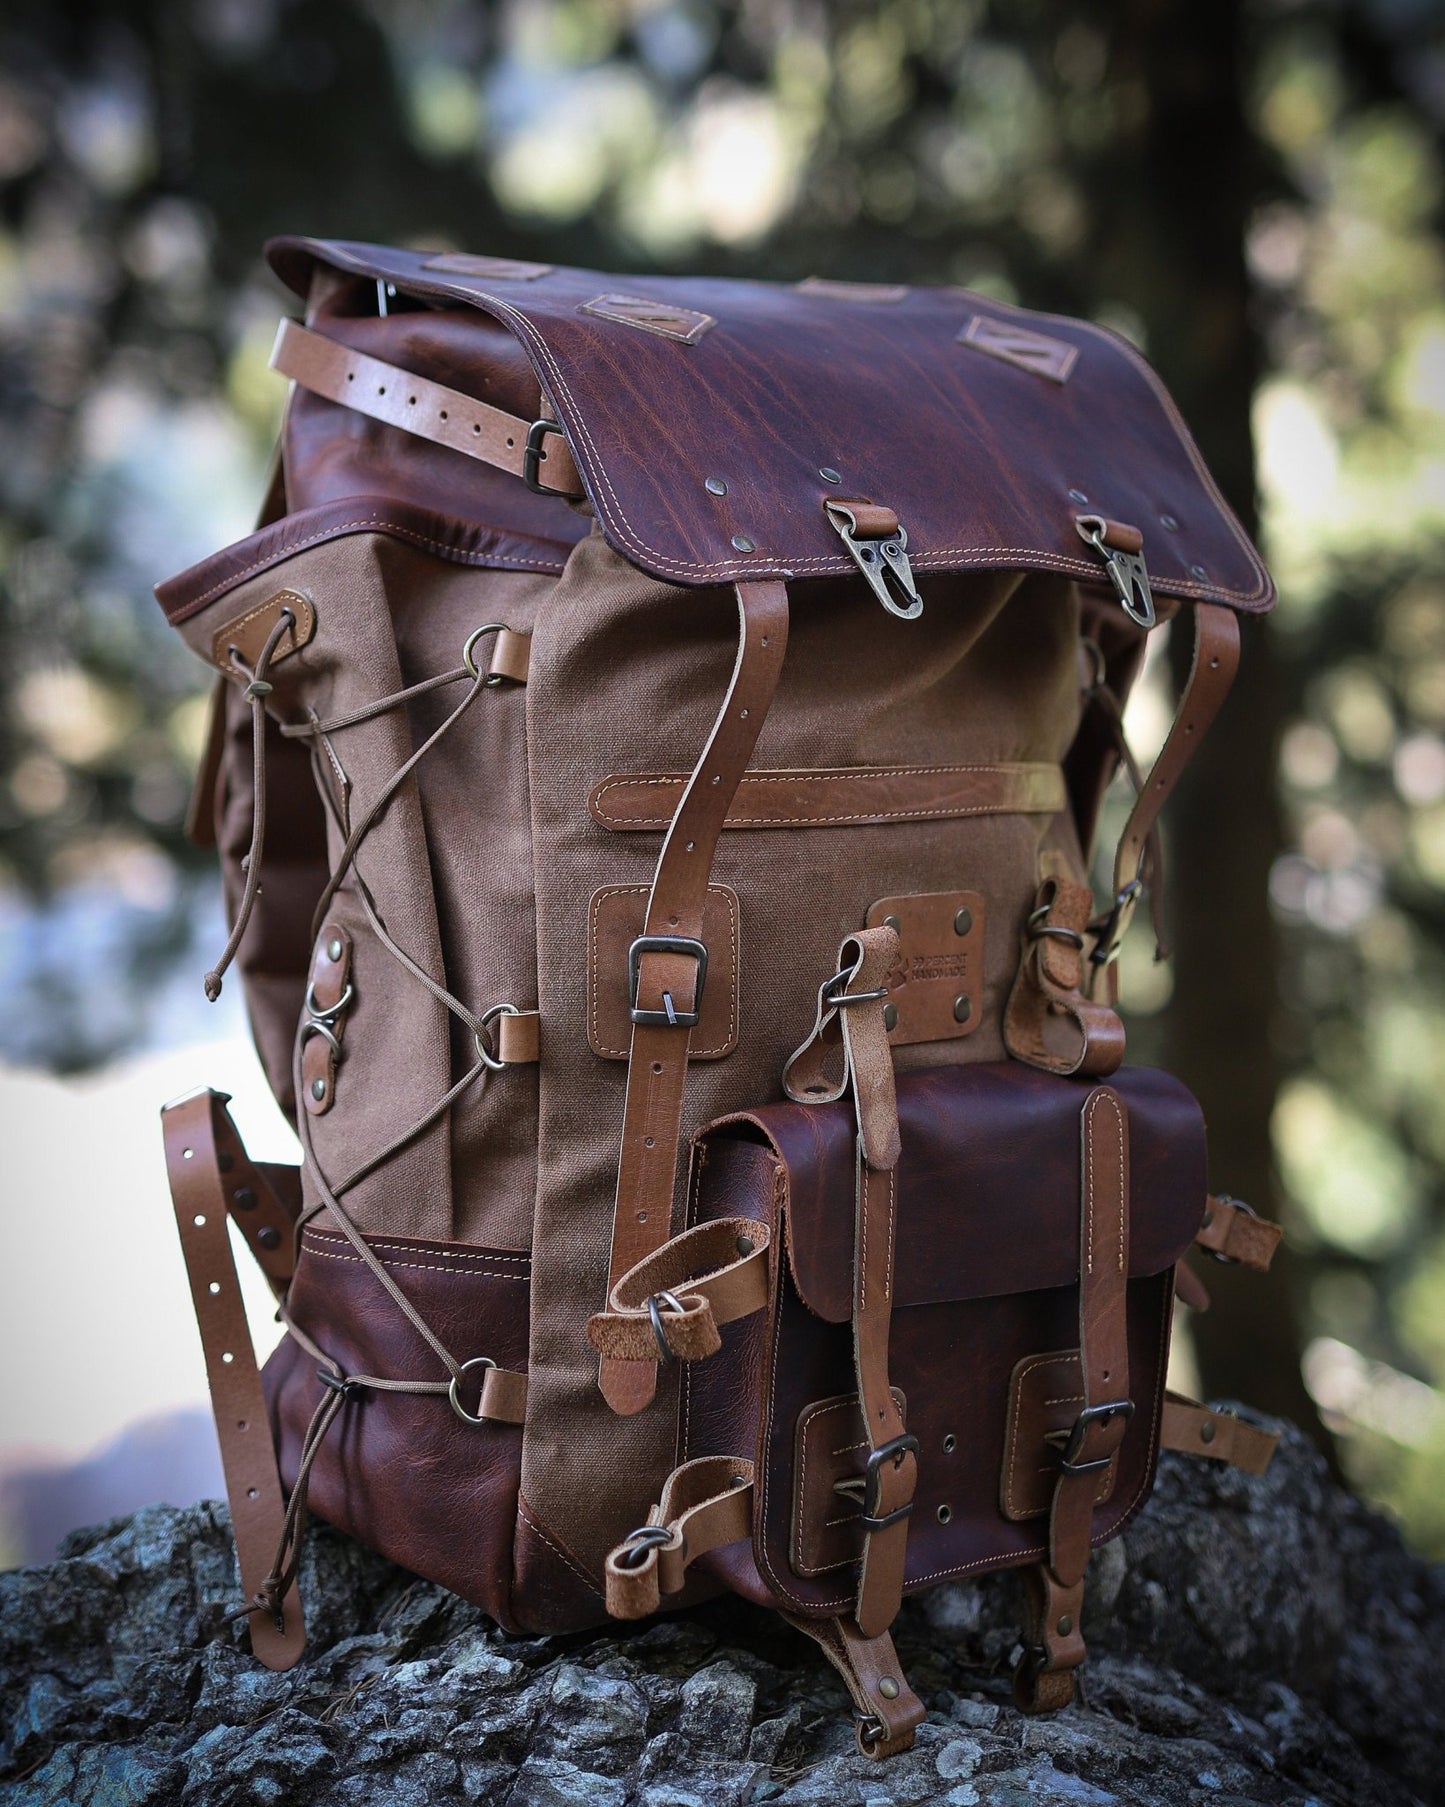 Handmade Leather Backpack | Brown | Waxed Canvas Backpack | Bushcraft Backpack | Travel, Camping, Hiking | Personalization for your request bushcraft - camping - hiking backpack 99percenthandmade   